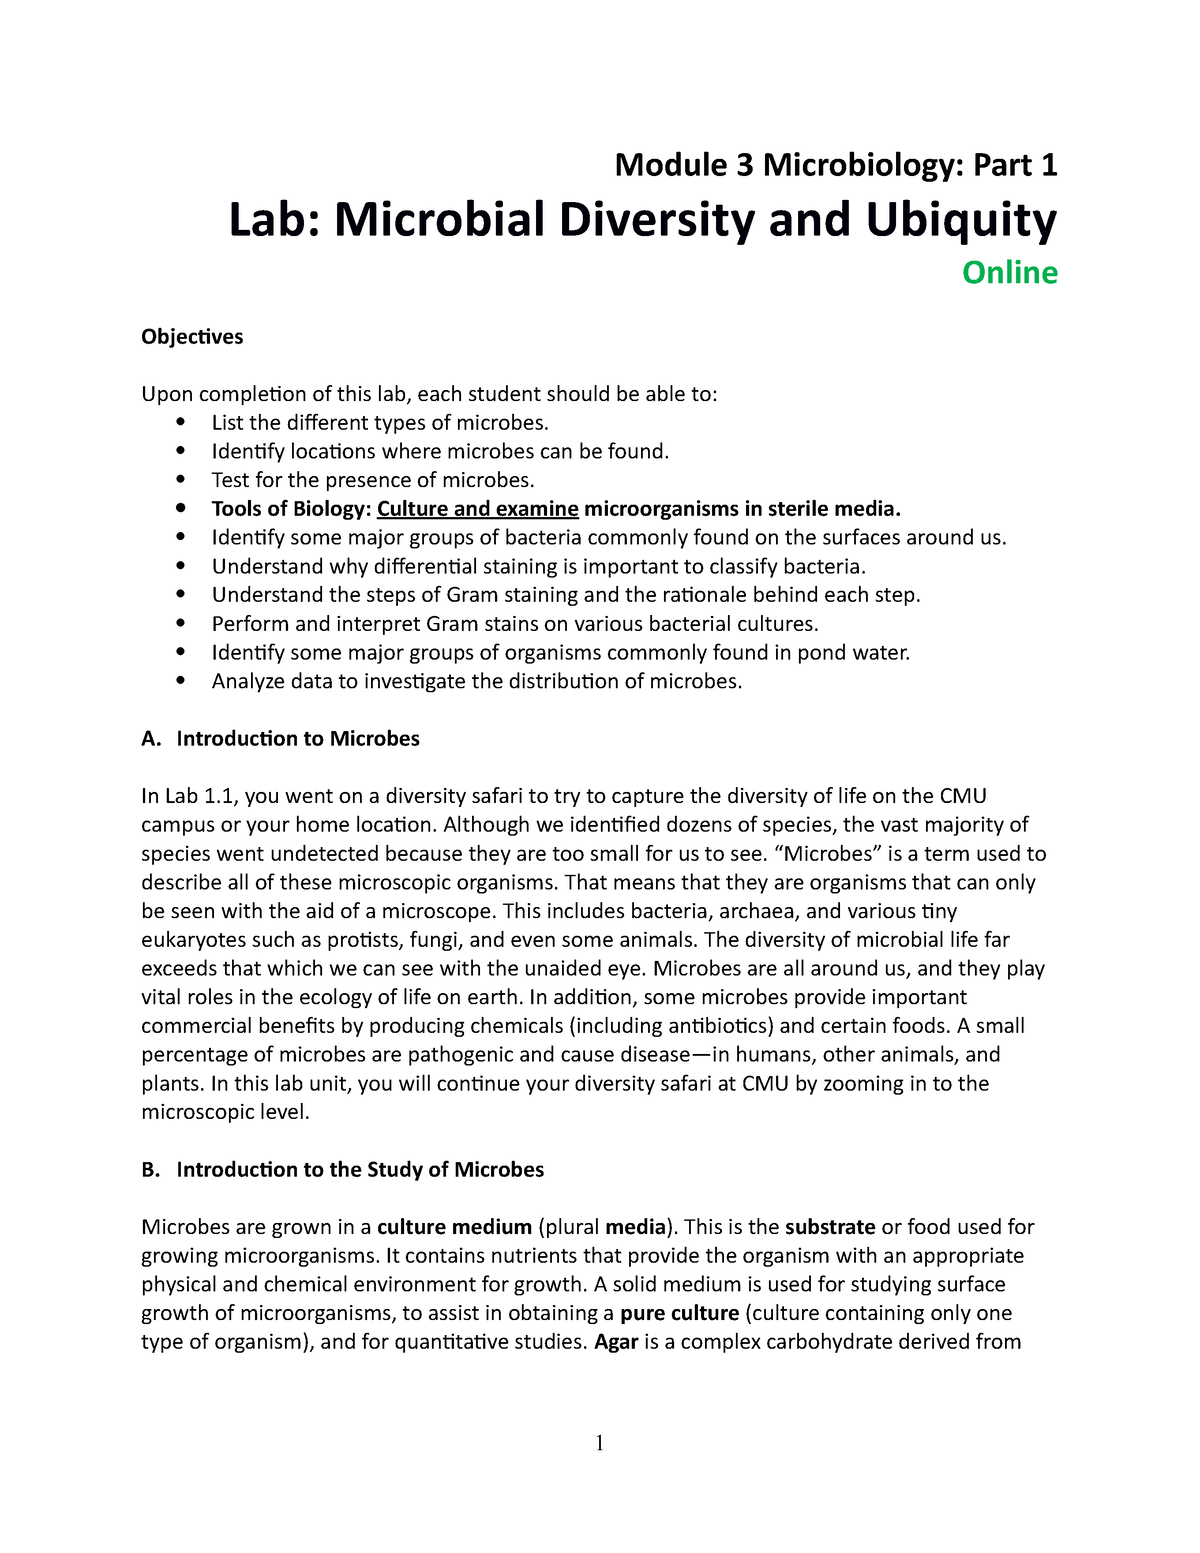 BIO 111 Lab 3.1 Microbial Diversity Fall 2020 Revised - Module 3 ...